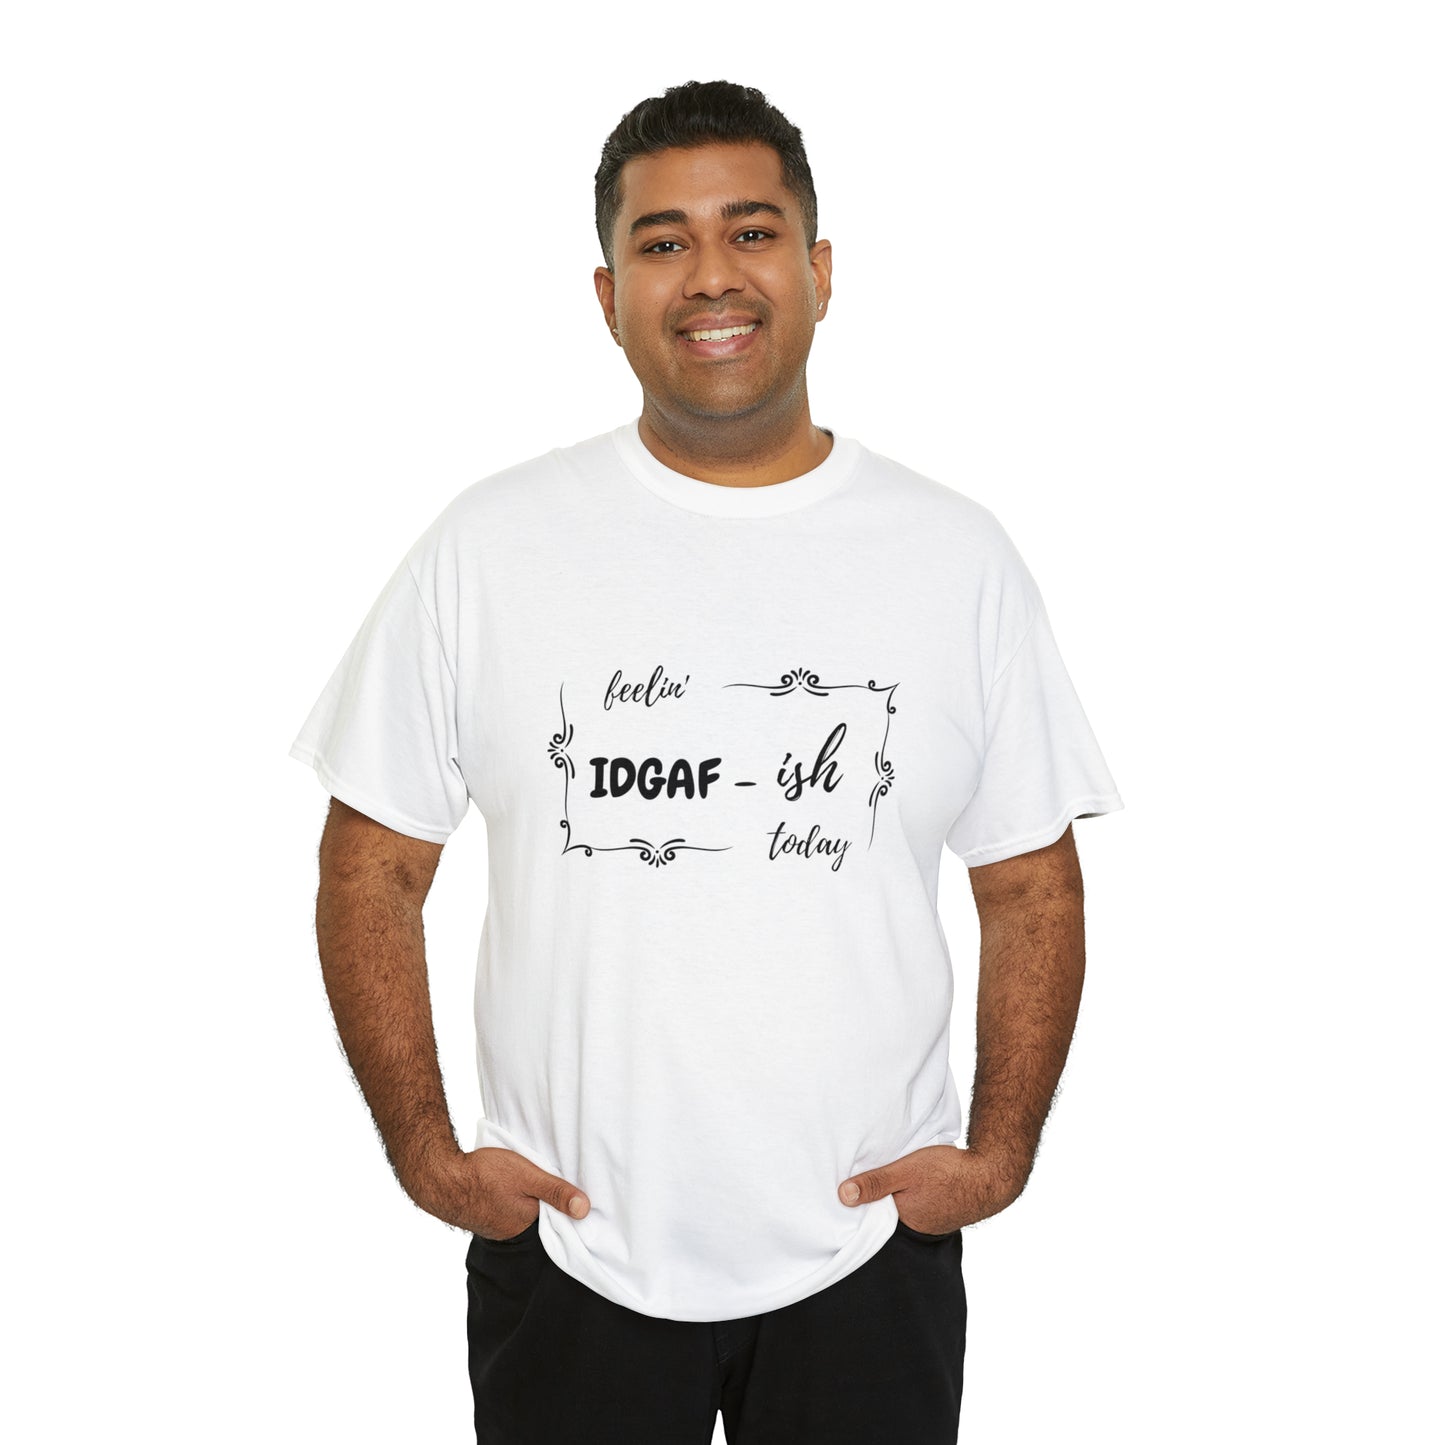 IDGAF Today T-shirt made with Heavy Cotton Great Gift Idea